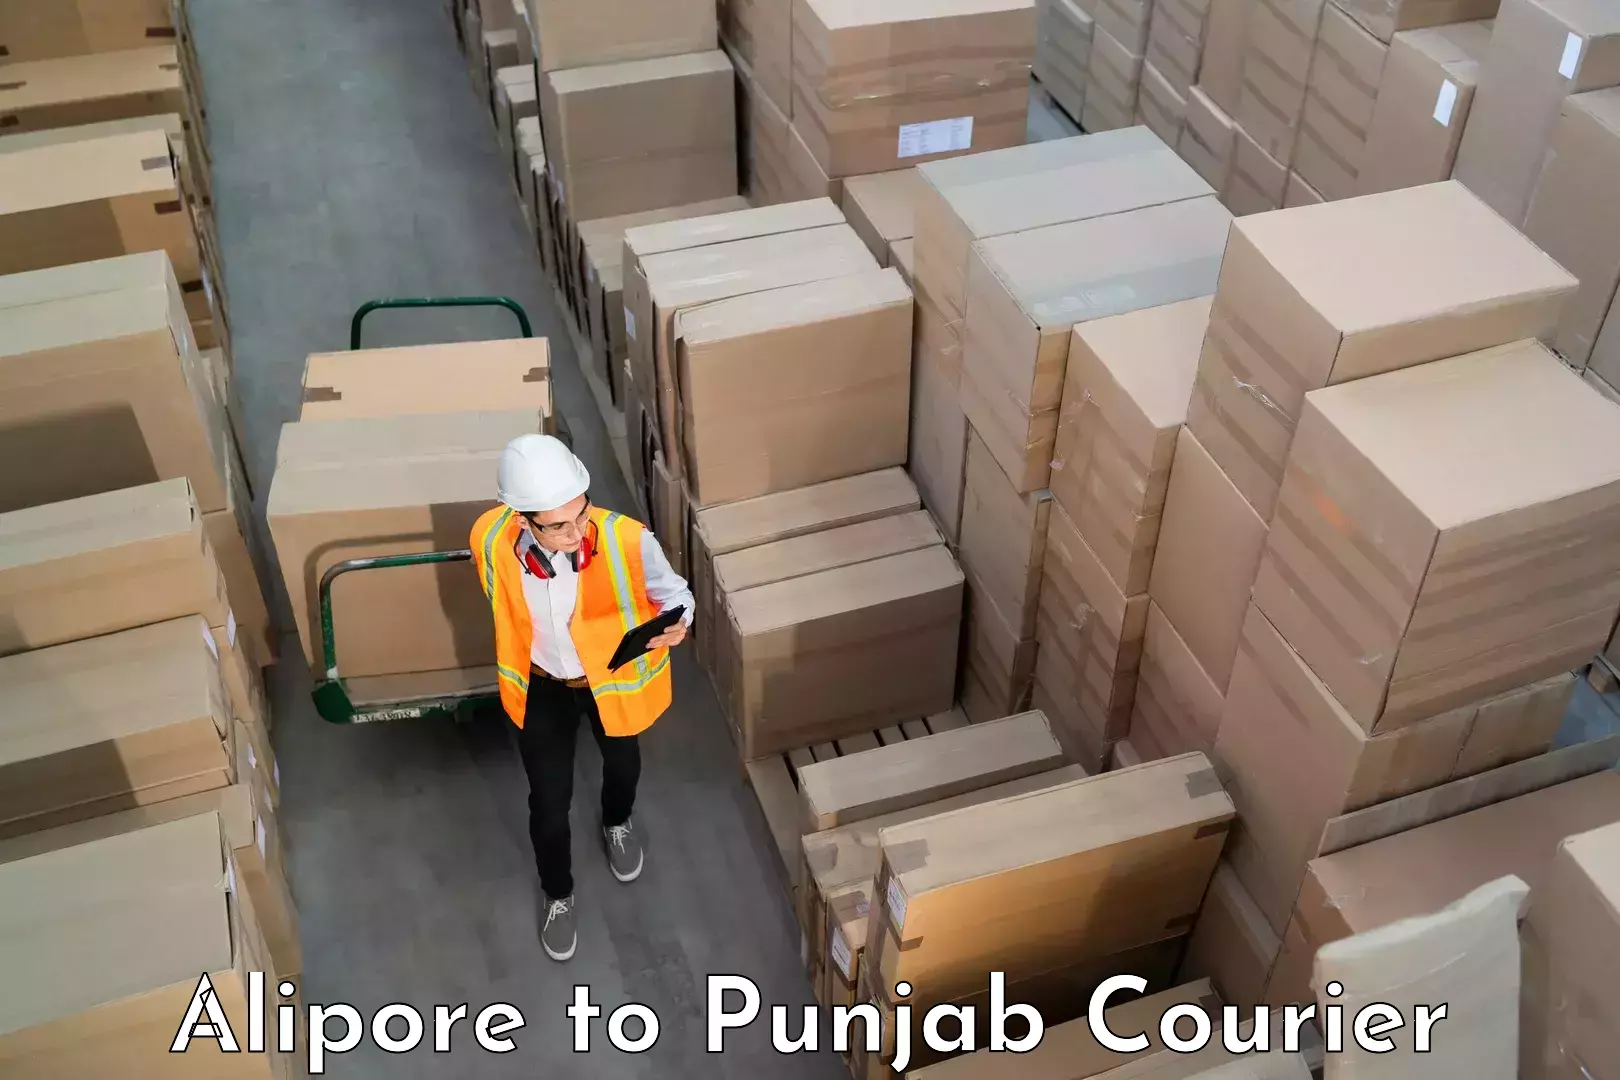 Luggage shipment specialists Alipore to Punjab